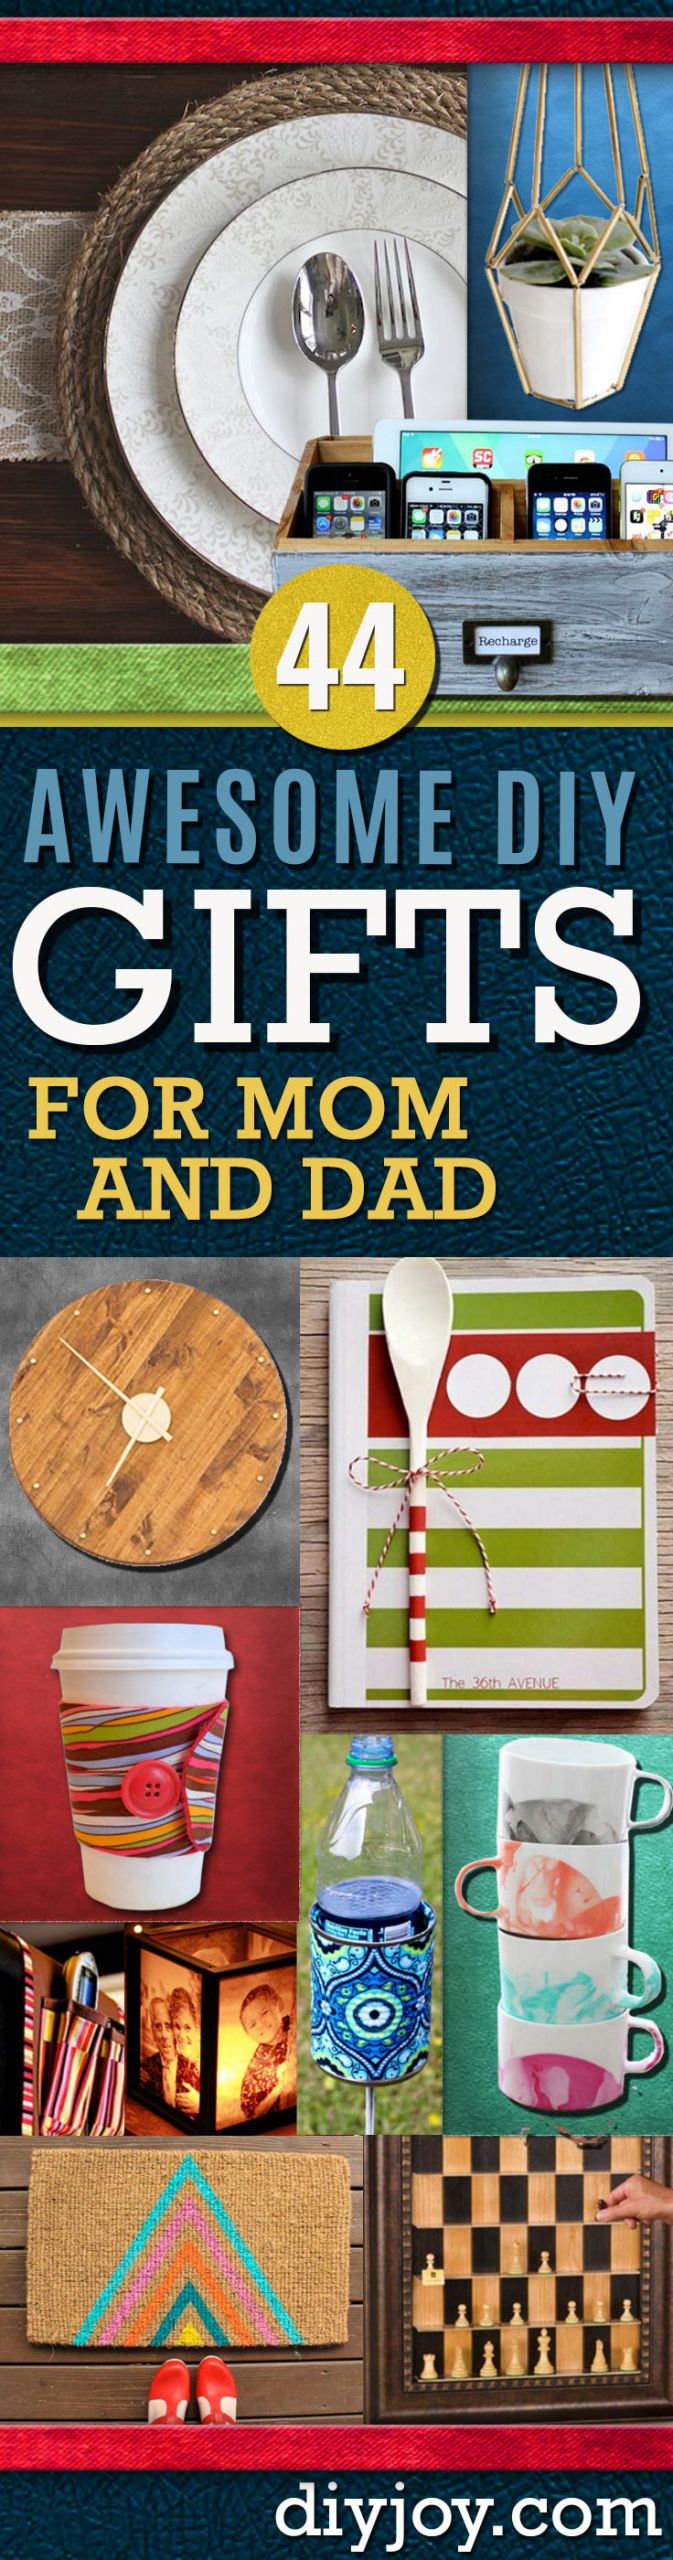 Gift Ideas For Mom For Christmas
 Awesome DIY Gift Ideas Mom and Dad Will Love